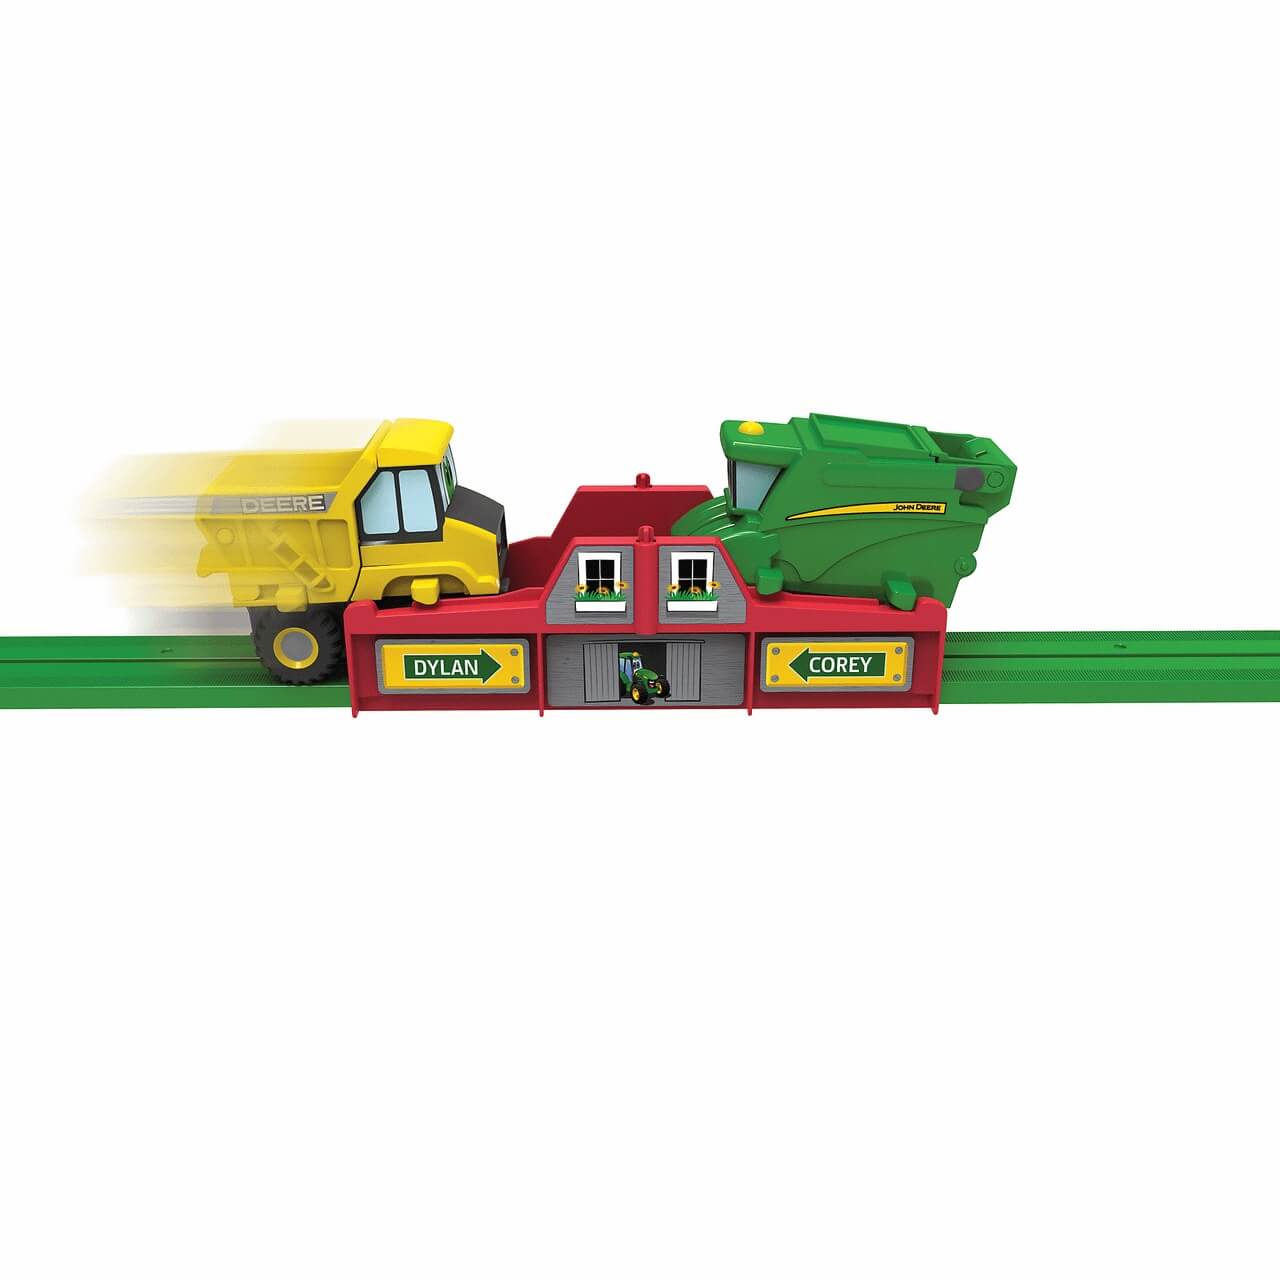 TOMY Big Loader Johnny Tractor & The Magical Farm Playset